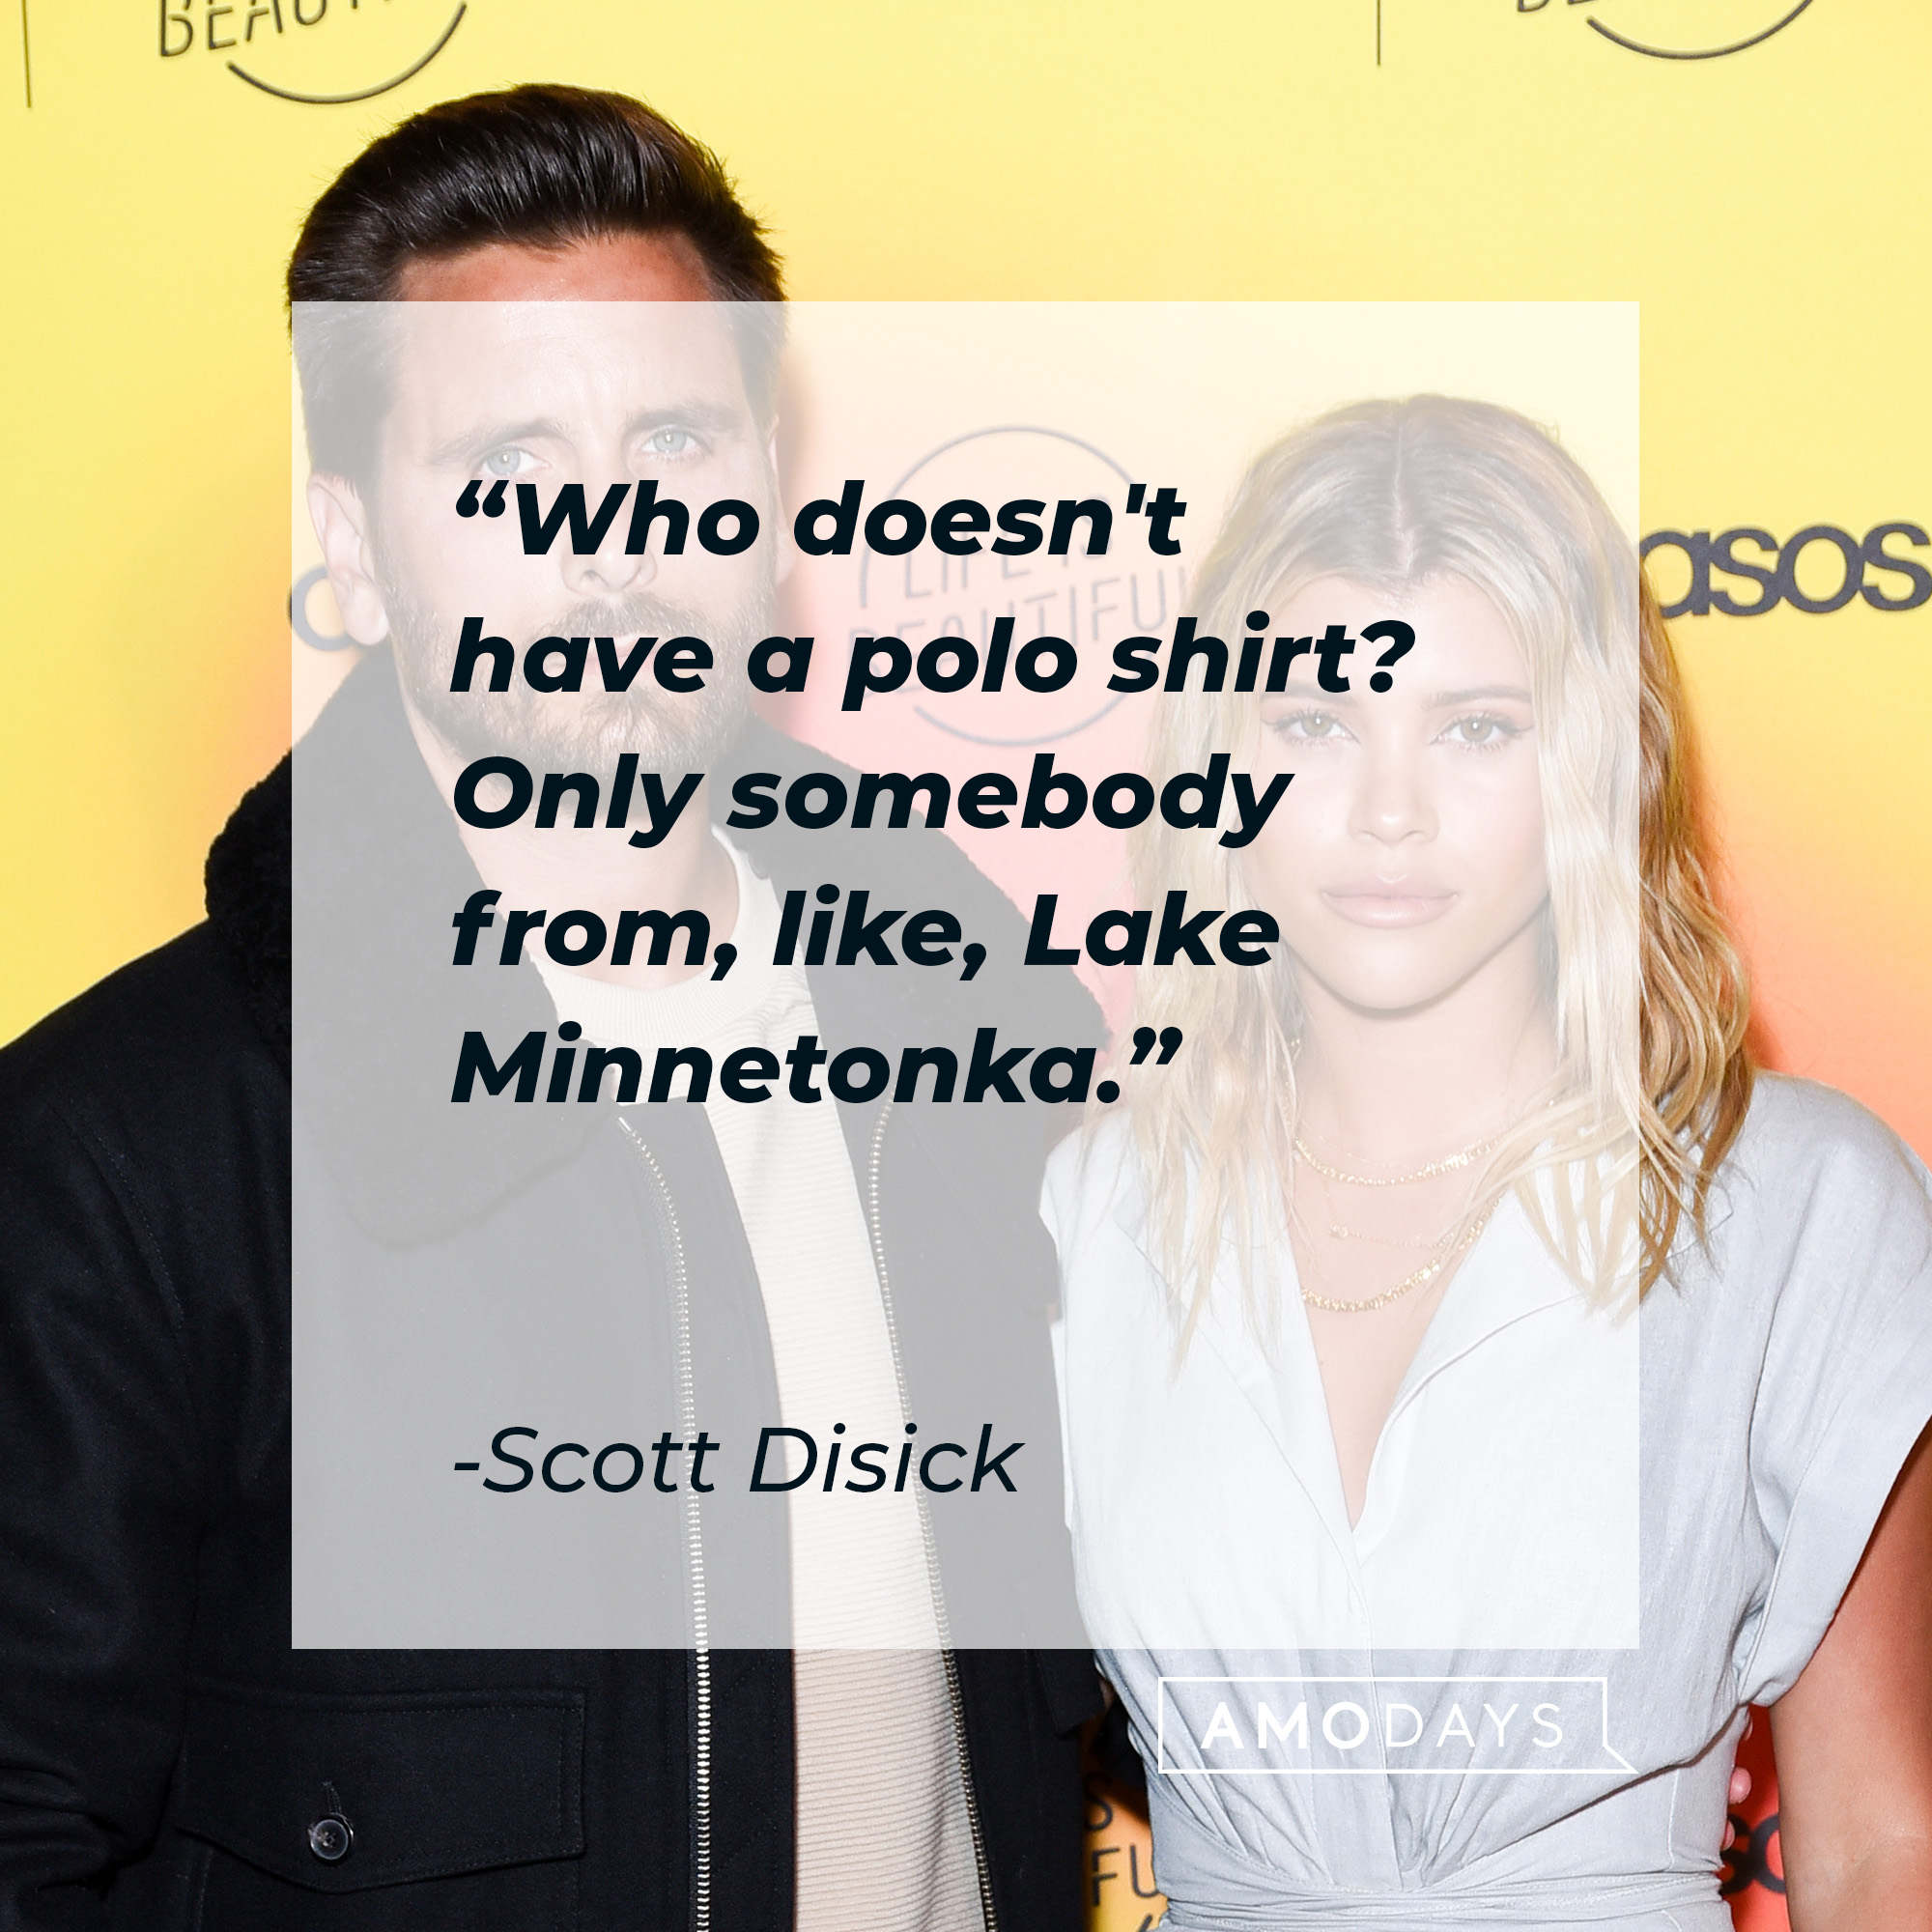 Scott Disick quote: "Who doesn't have a polo shirt? Only somebody from, like, Lake Minnetonka."